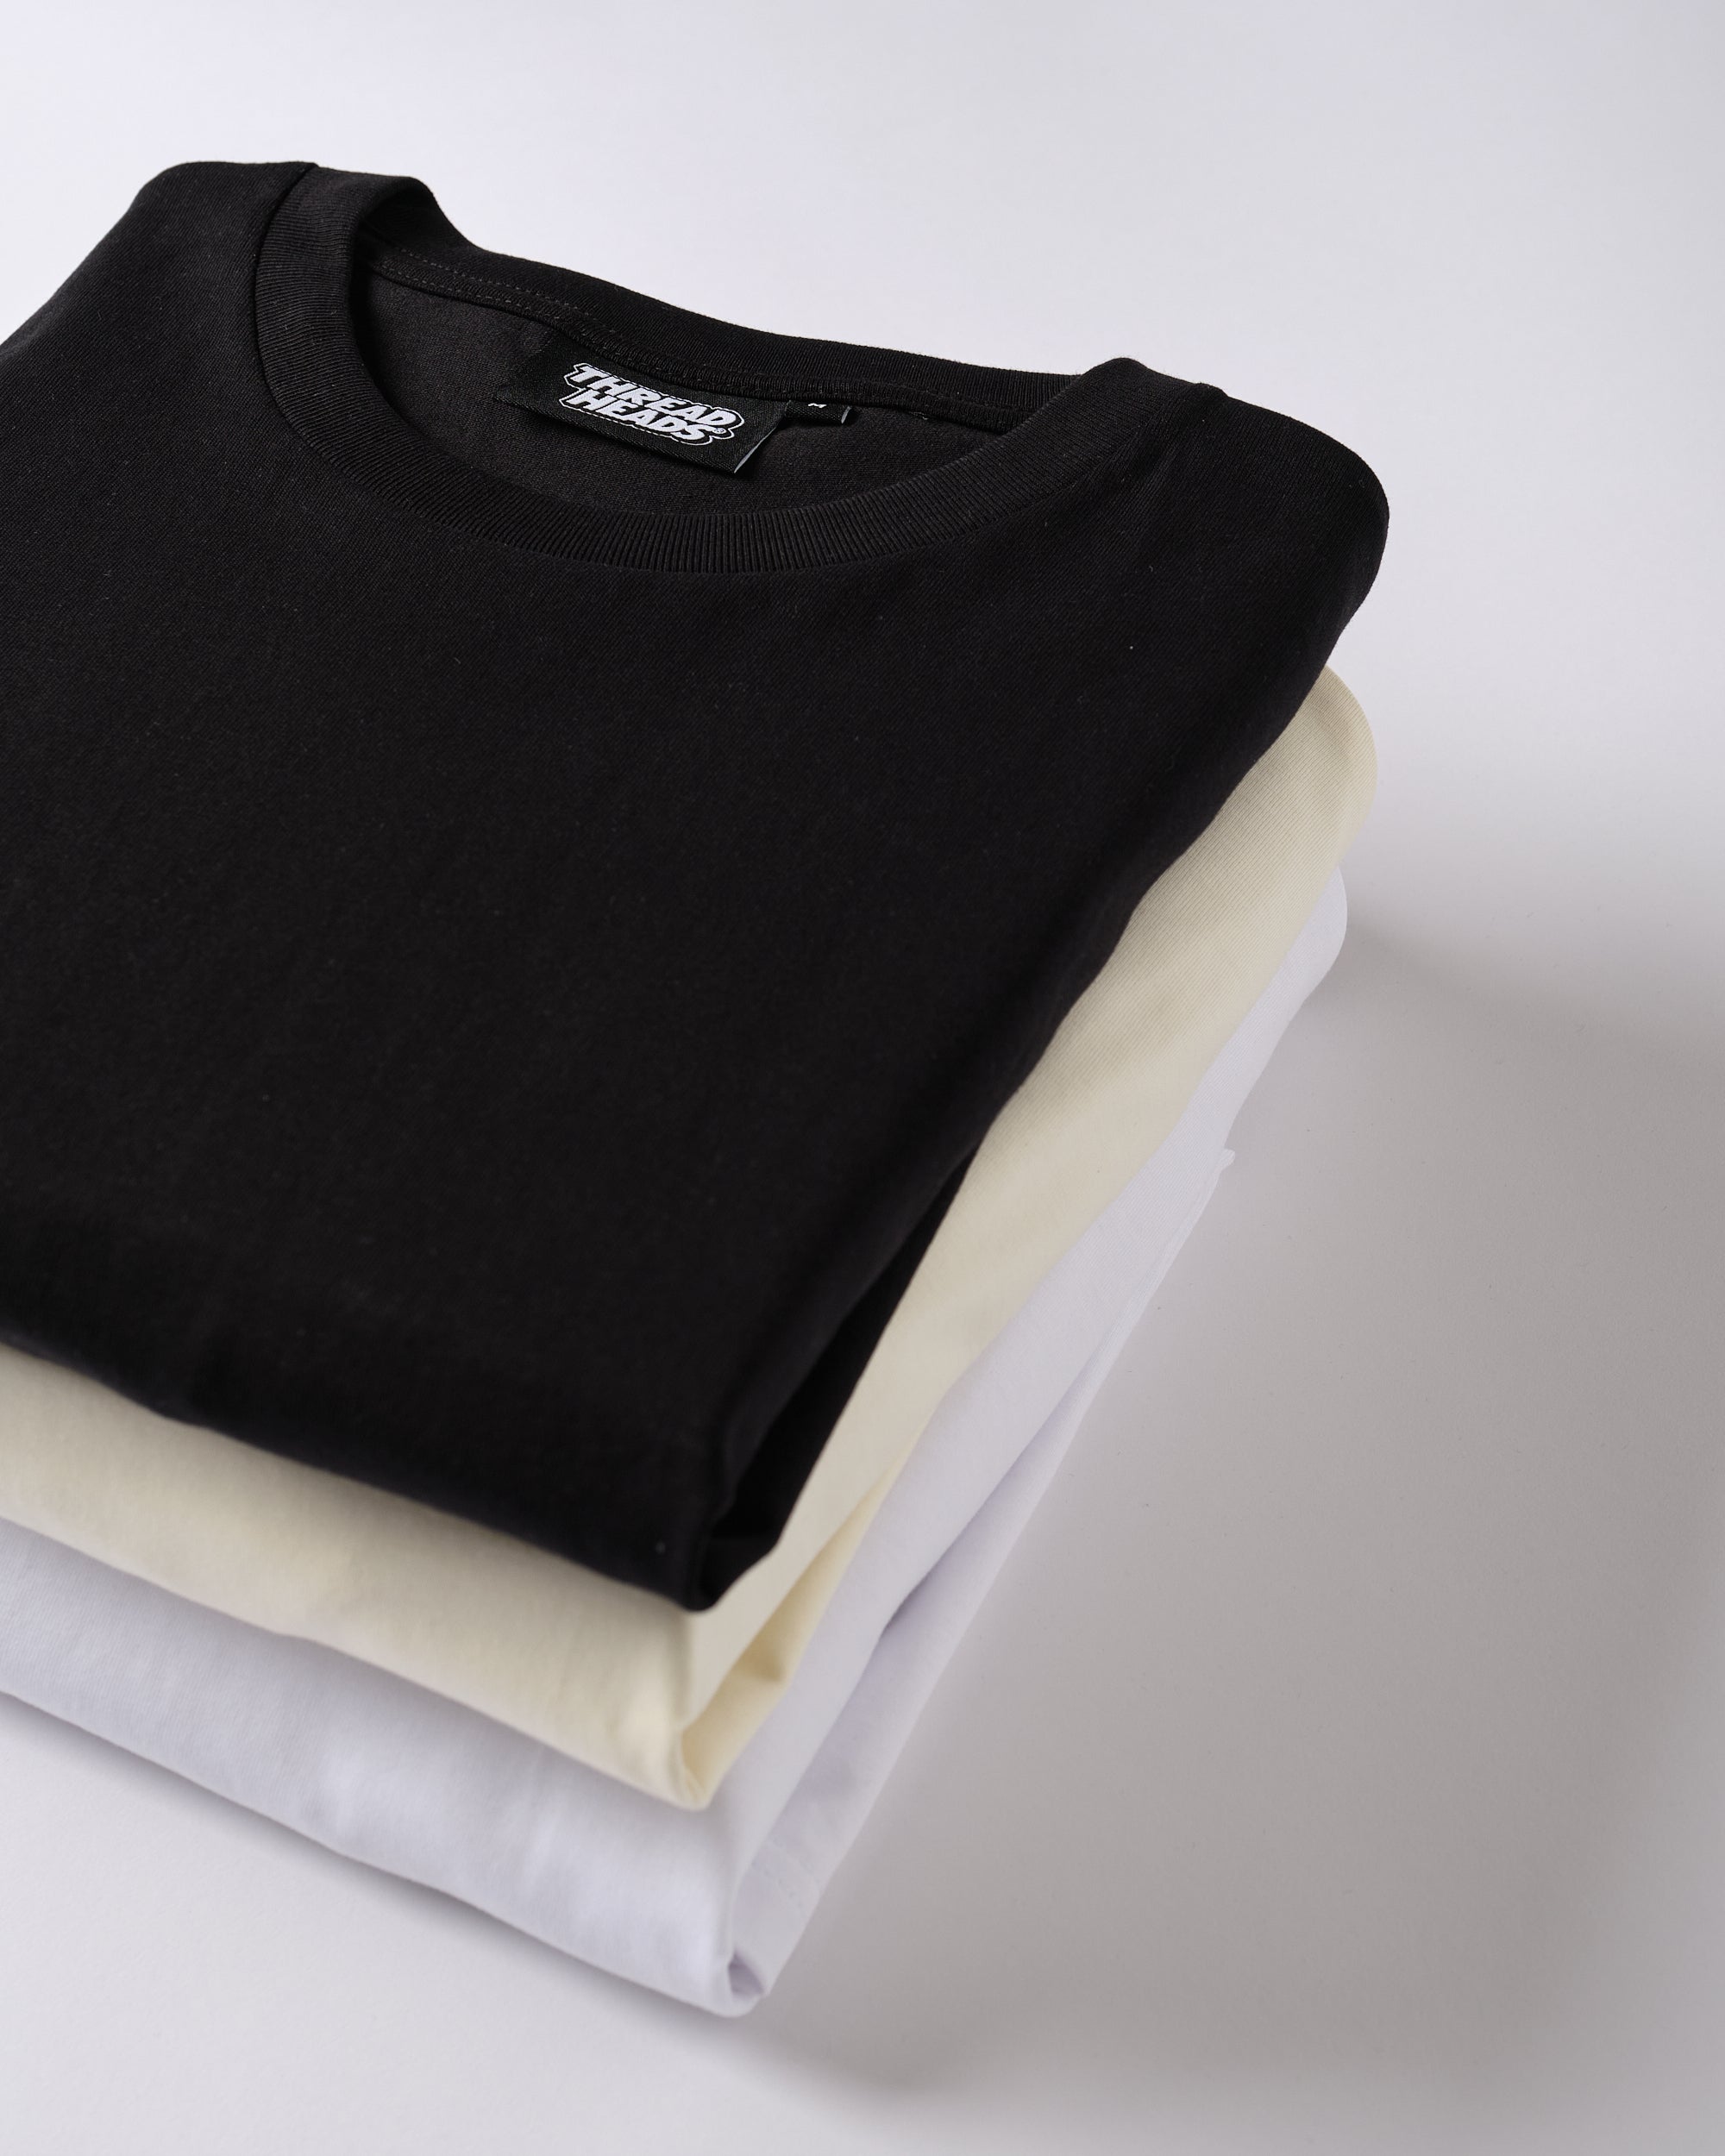 Classic Tee 3-Pack: Black, Natural & White